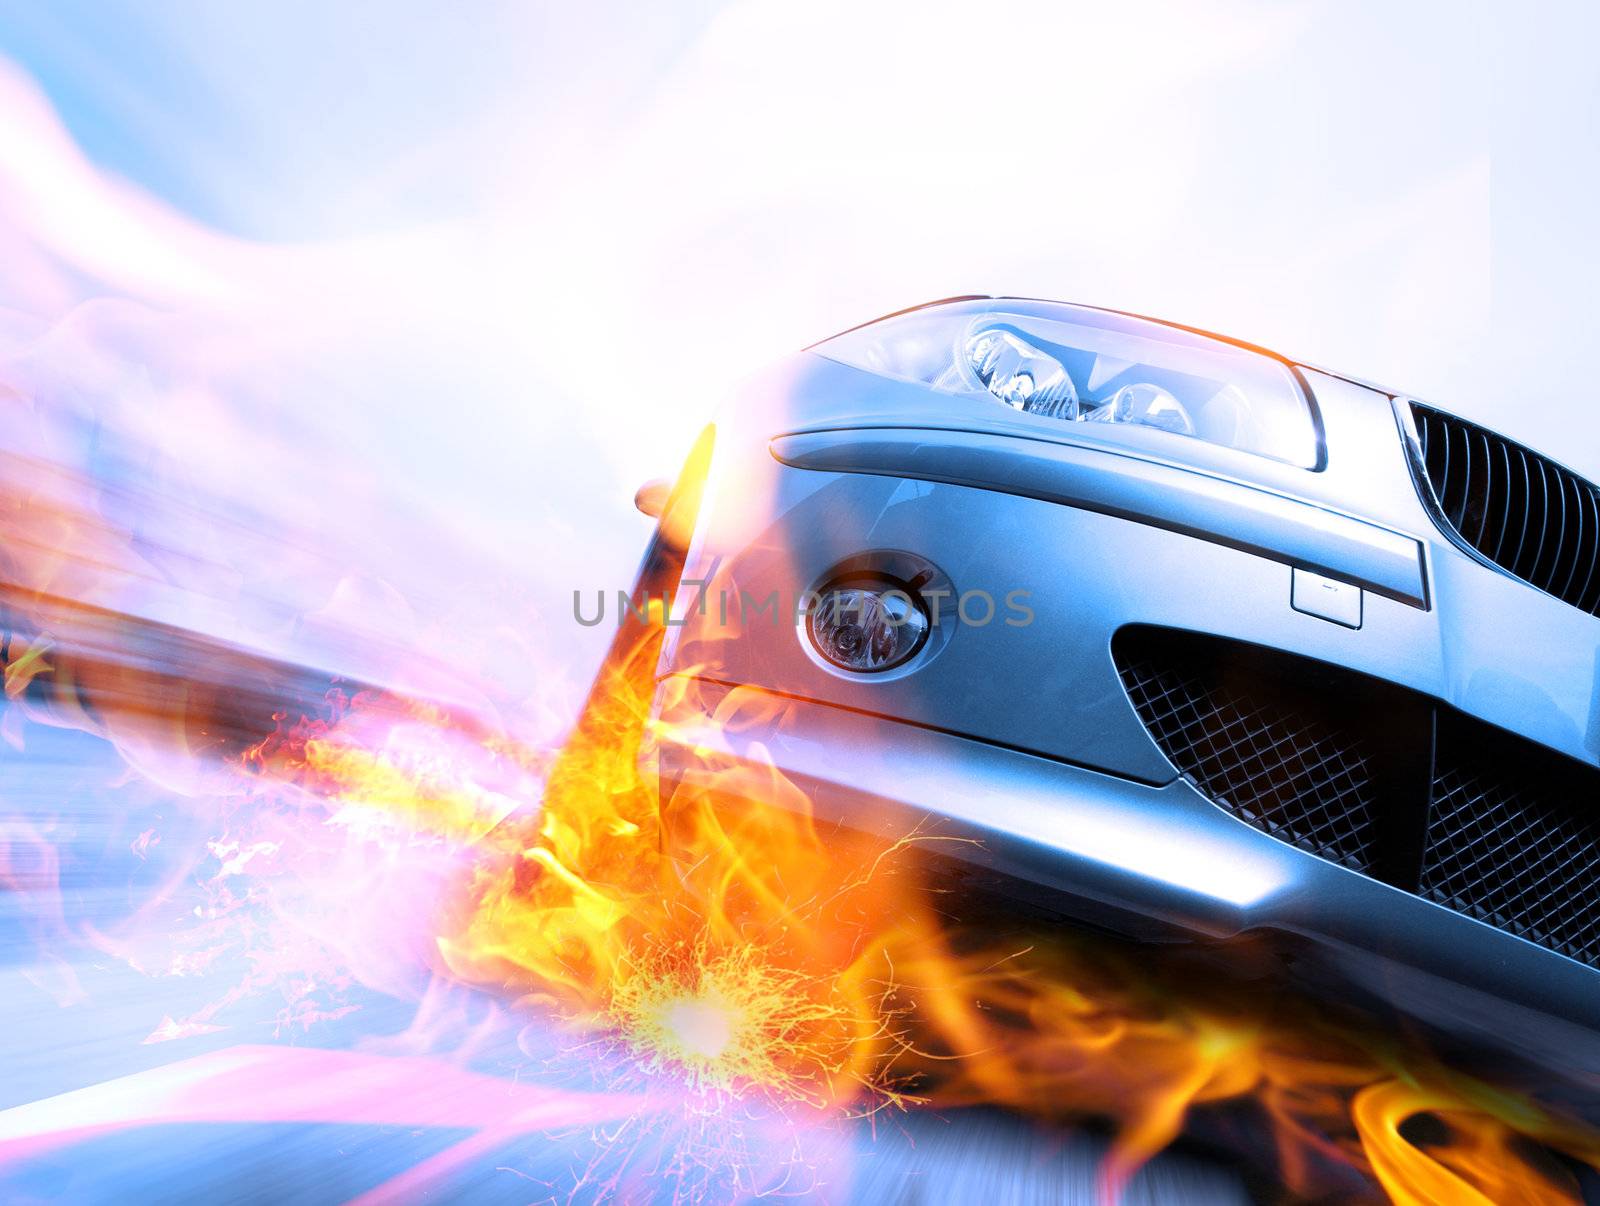 Fast car moving with motion blur with fire burning tires